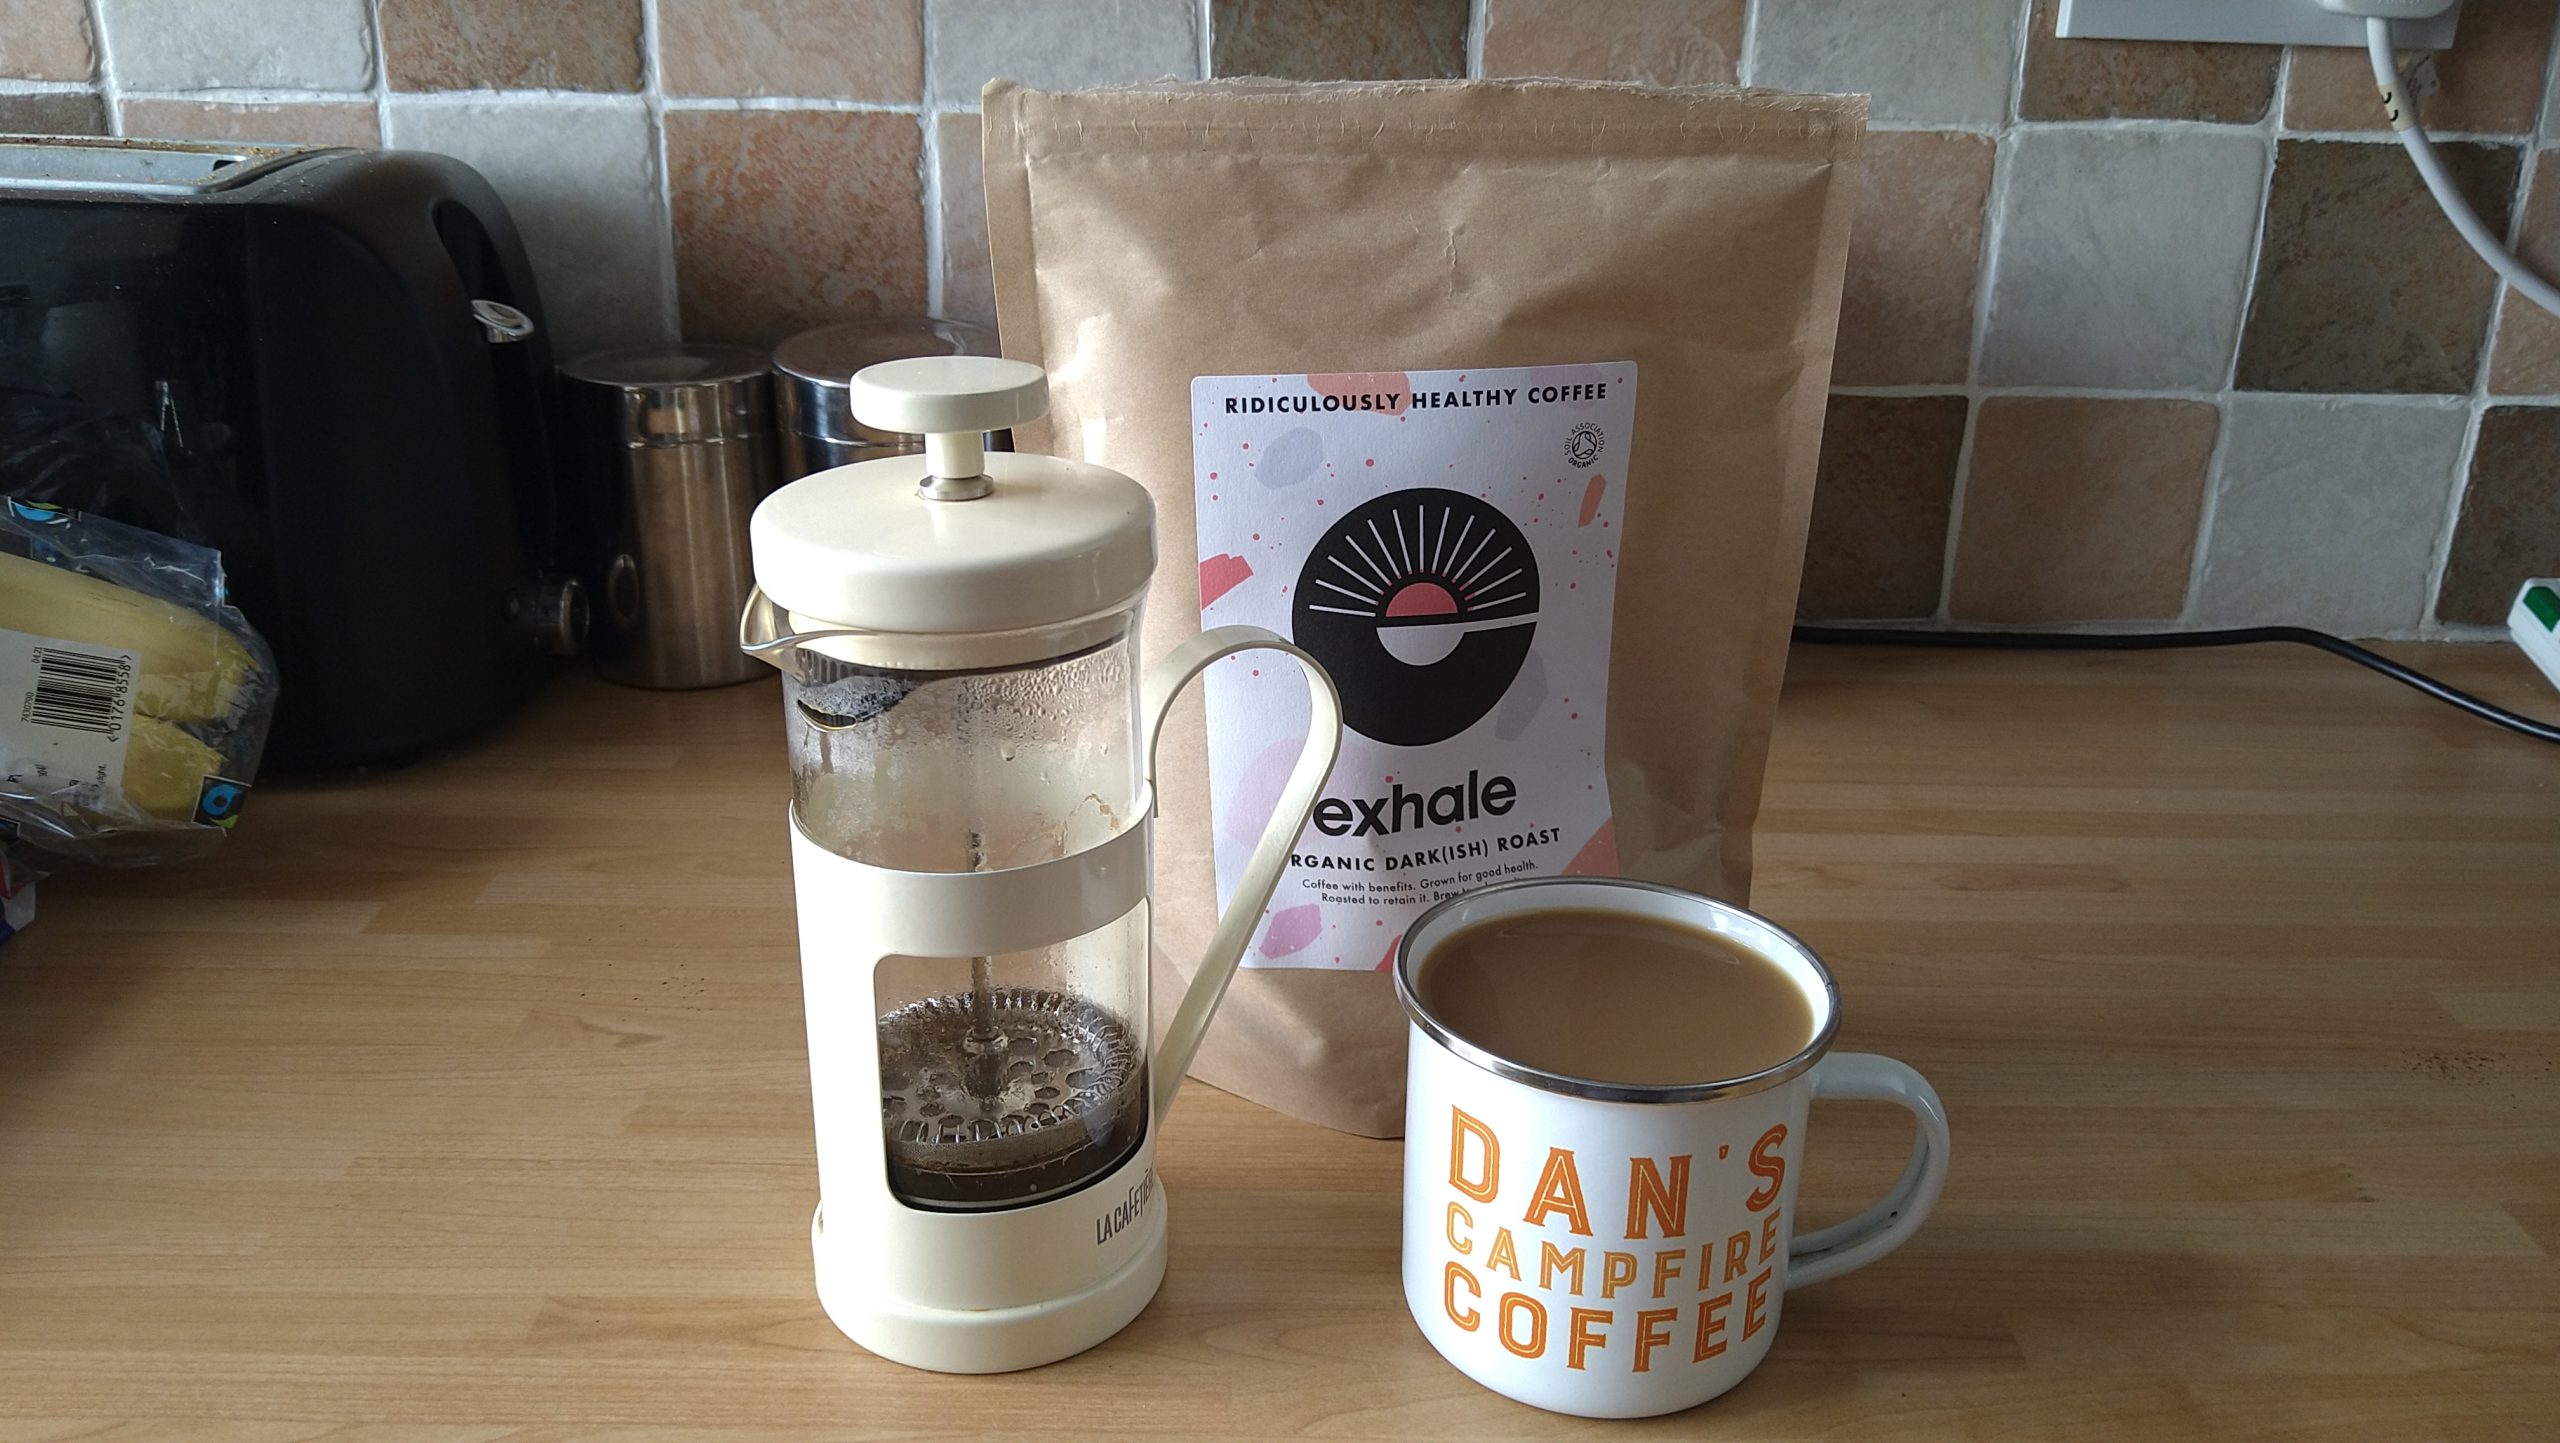 Exhale Coffee review – has great benefits for adventurers